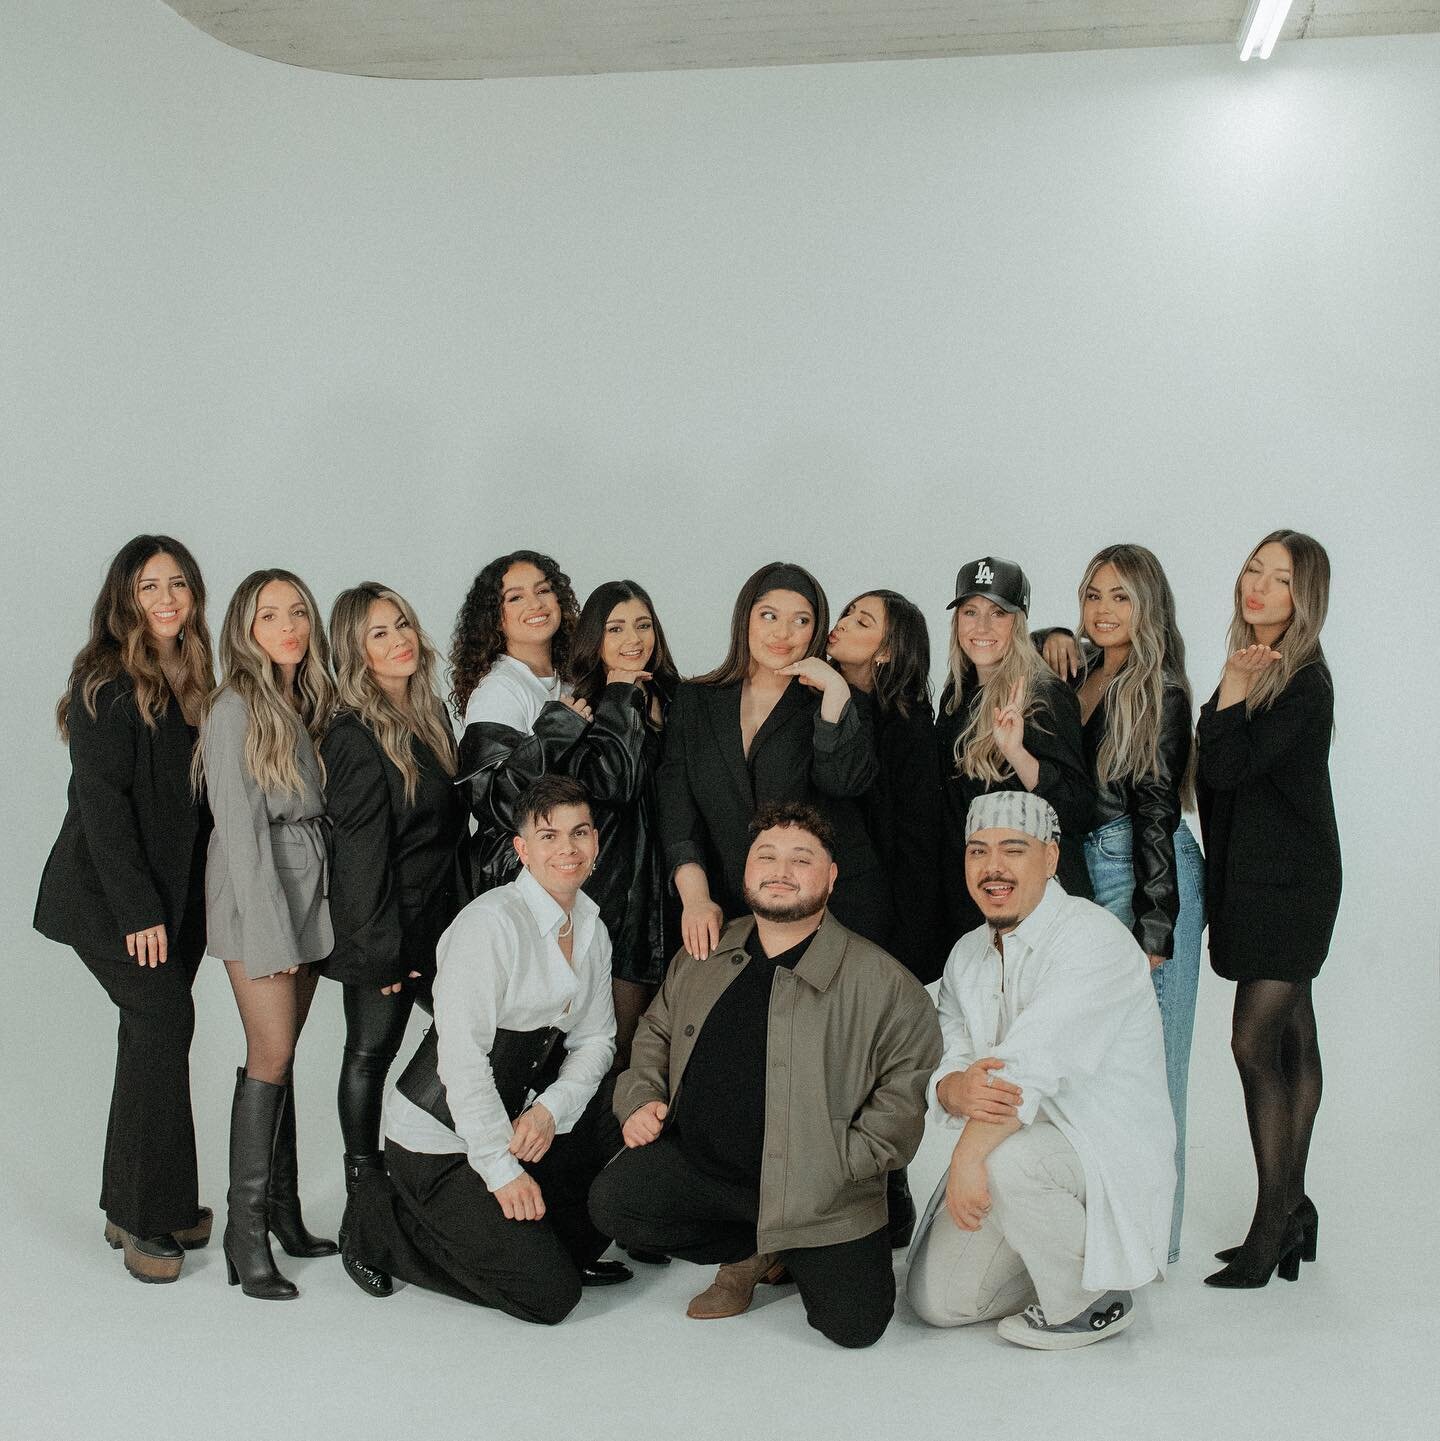 LOVE YOURS 🖤 

Our beautiful team! 
So much talent under one roof, it&rsquo;s insane. 
If you get to call ANY of these stylists your hairdresser, you truly are so lucky.

.
.
.
.
.
#richbrunette #hairtrends #hairtrends2023 #milbon #Businessowner #re